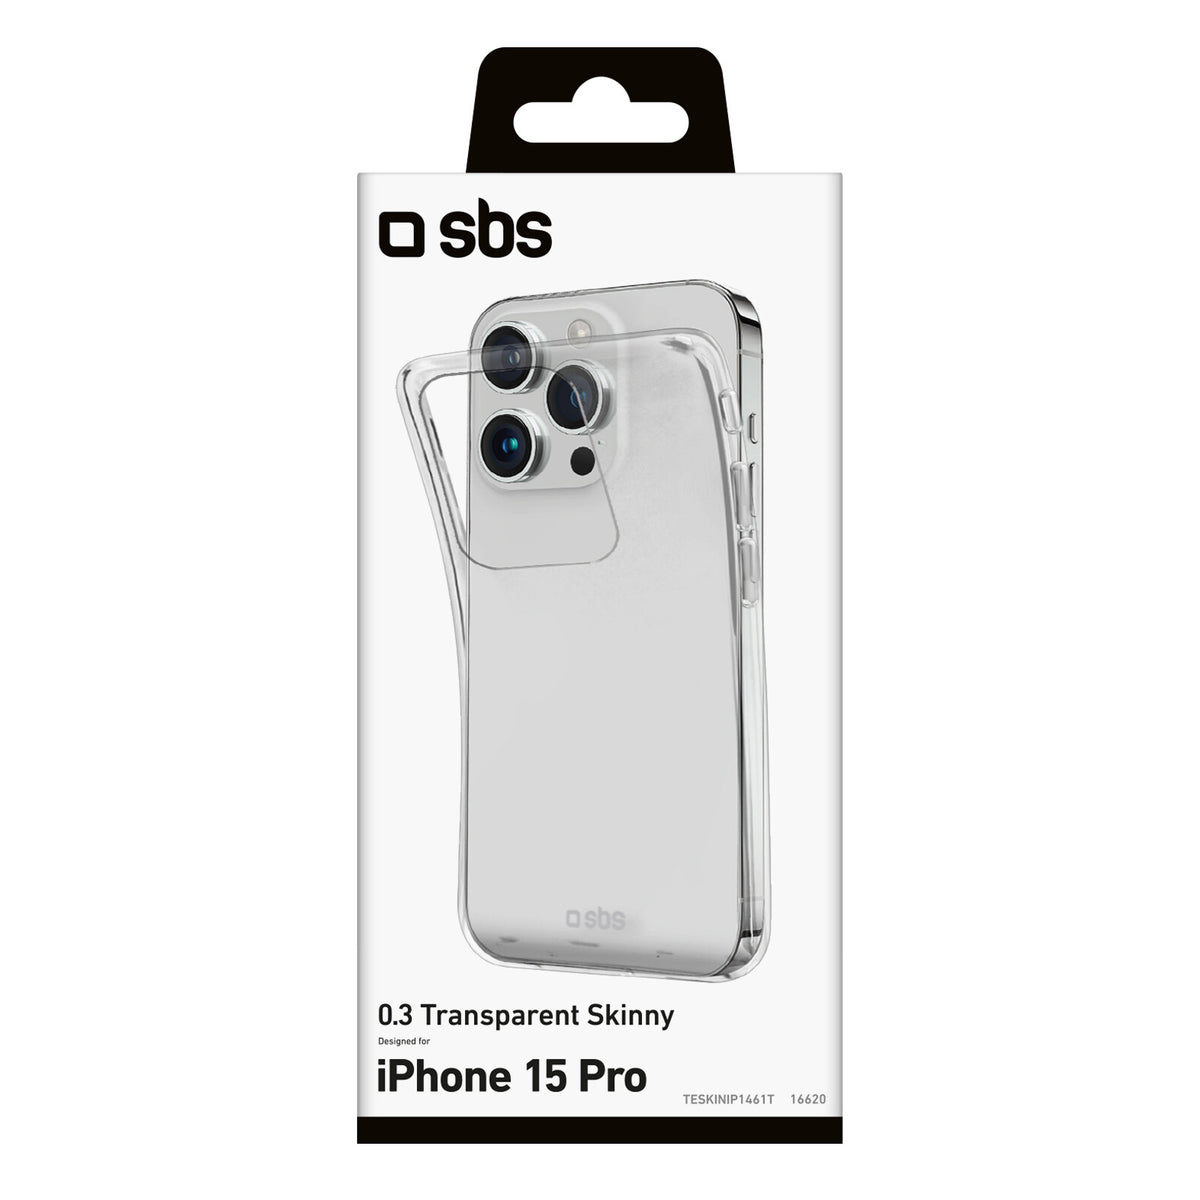 SBS Skinny mobile phone case for iPhone 15 Pro in Transparent